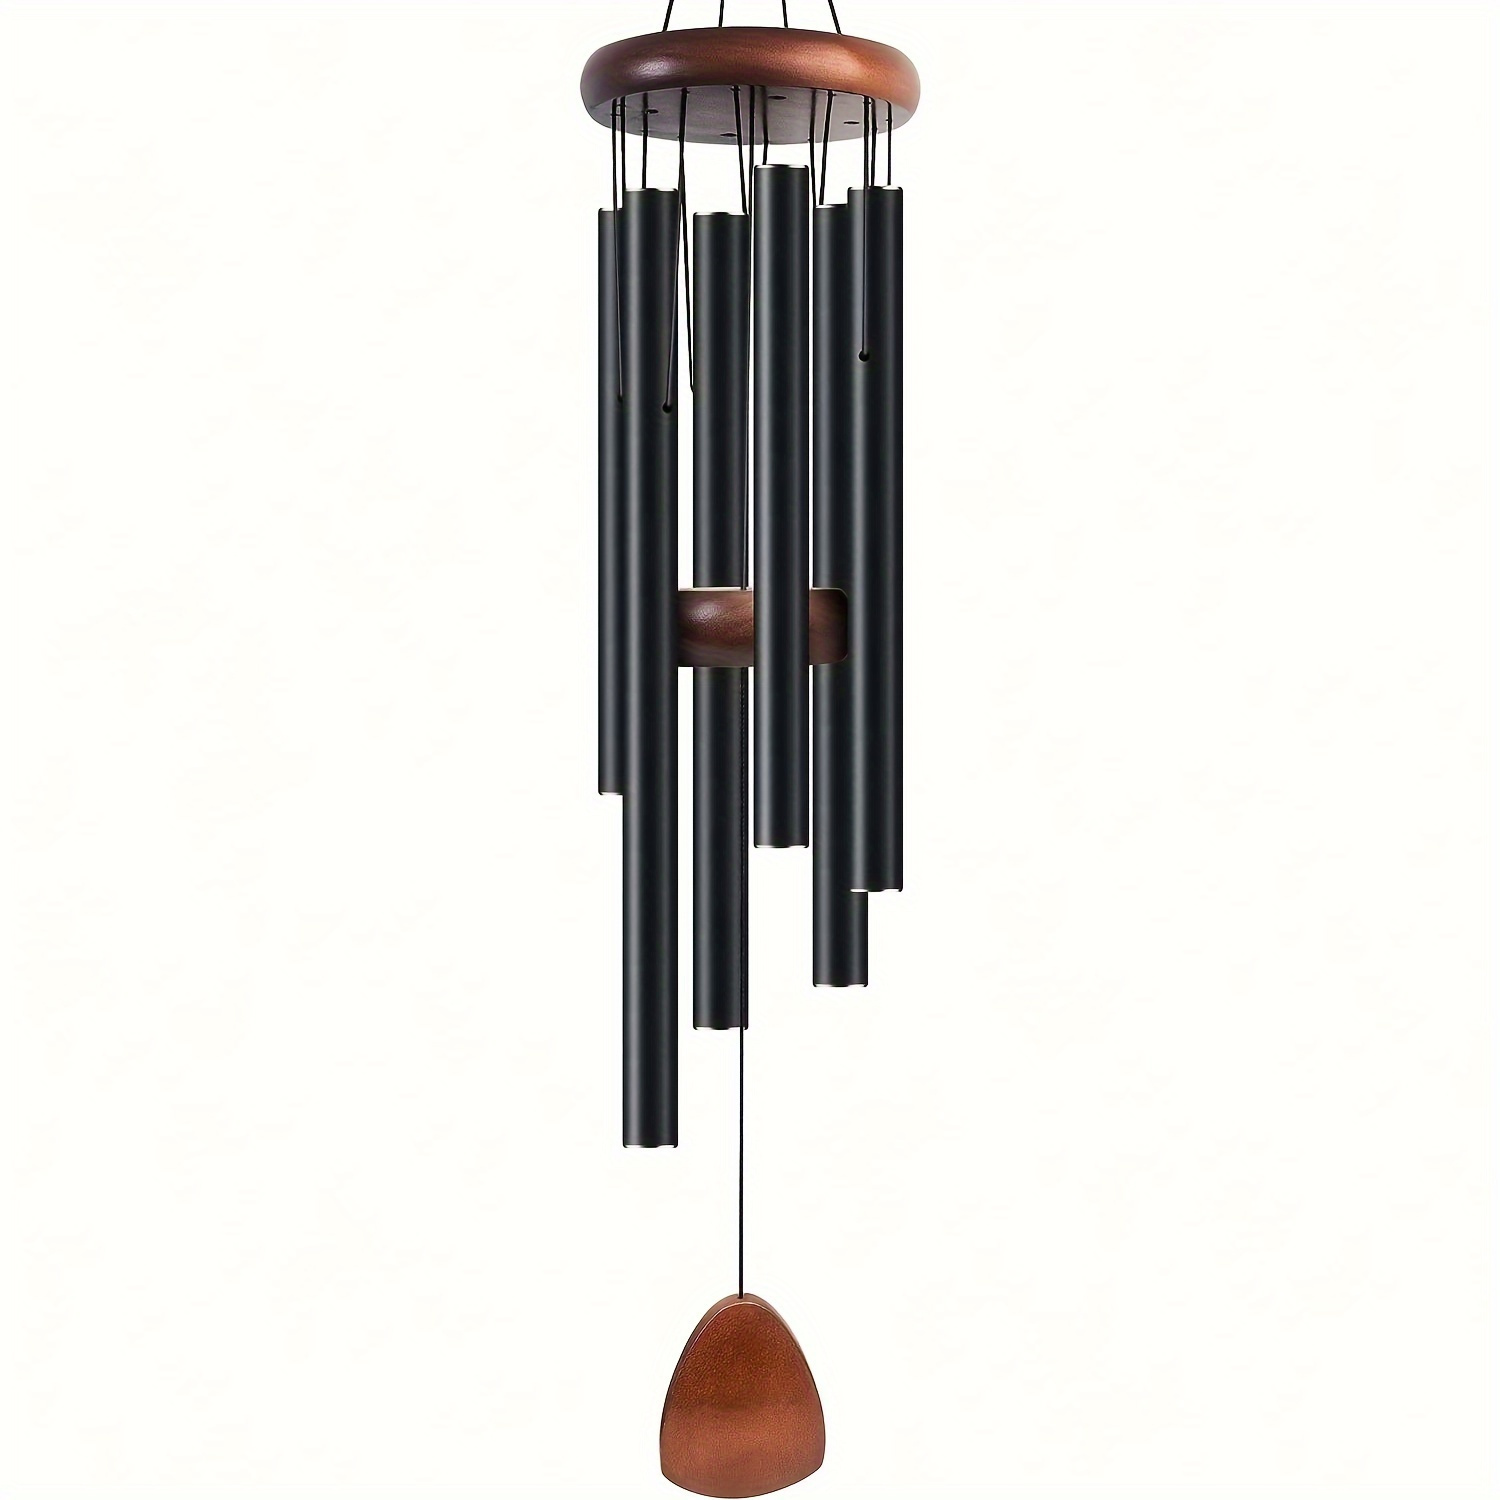 

Soothing 26-inch Deep Tone Wind Chimes - Black Aluminum & Durable Pine Wood, Perfect Memorial Gift For Mom, Grandma, Neighbors